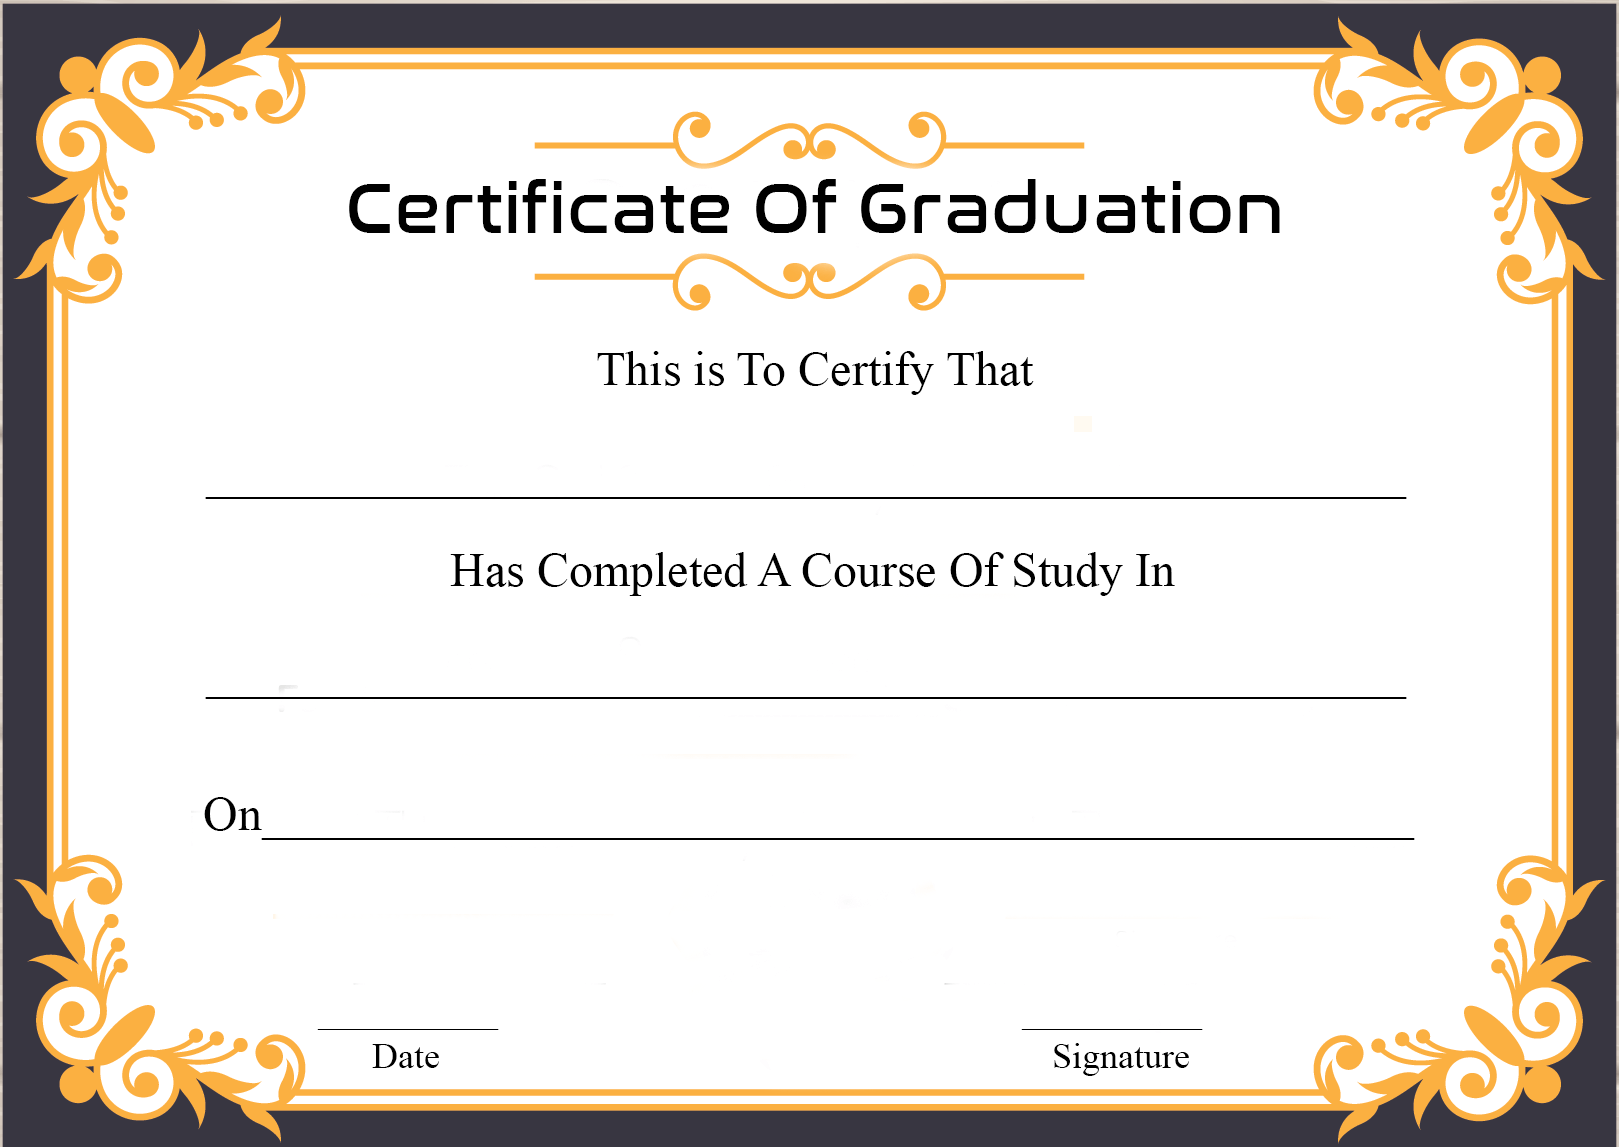 🥰Free Certificate Template Of Graduation Download🥰 Pertaining To School Certificate Templates Free